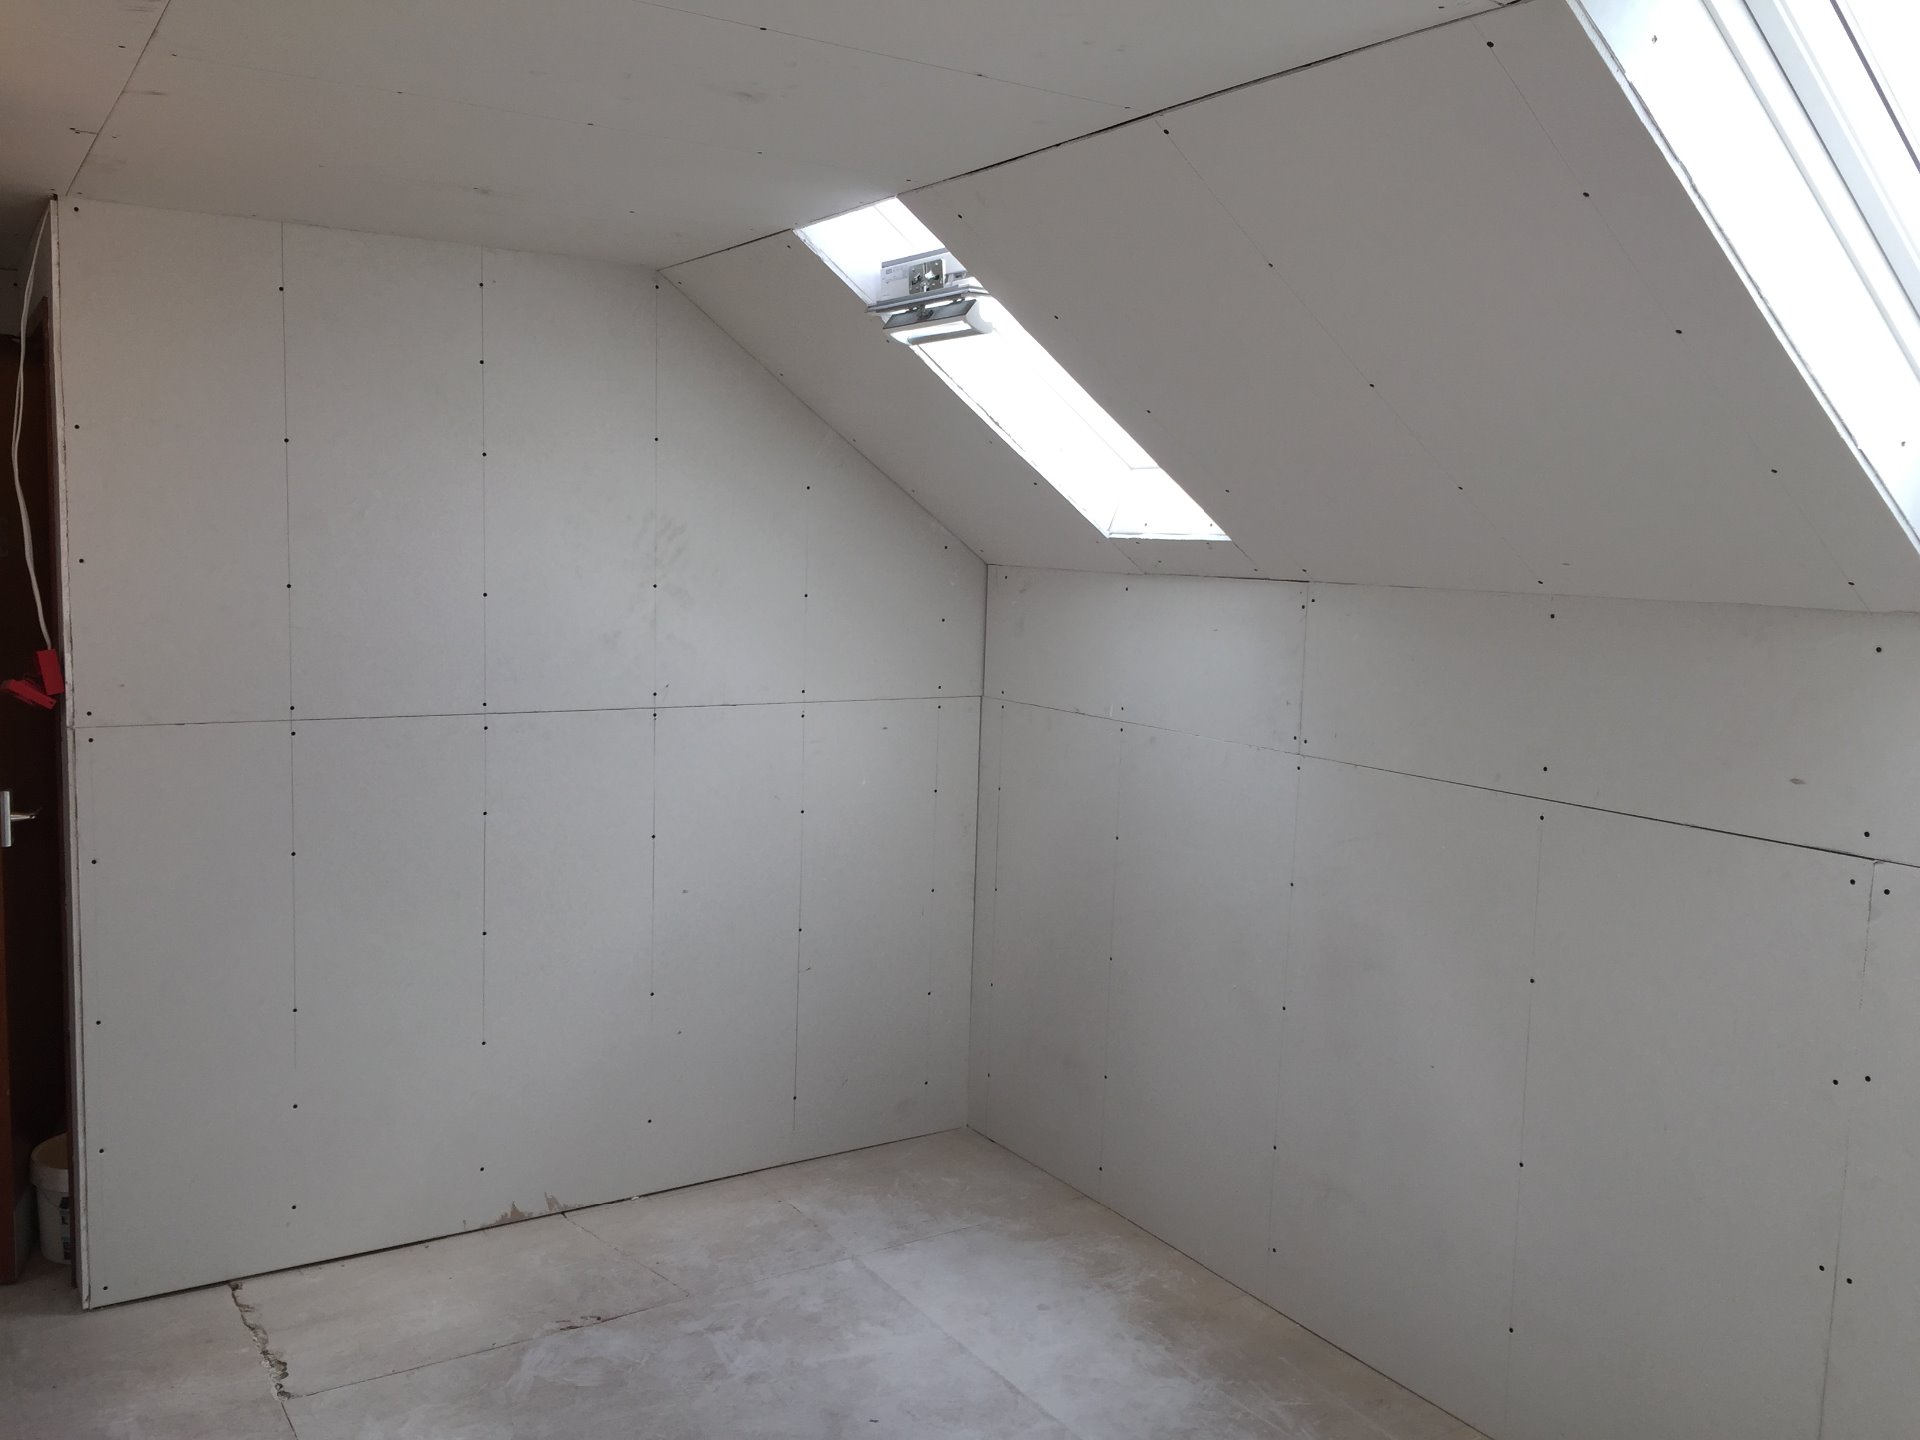 All walls were plasterboarded and joints taped. in North Devon